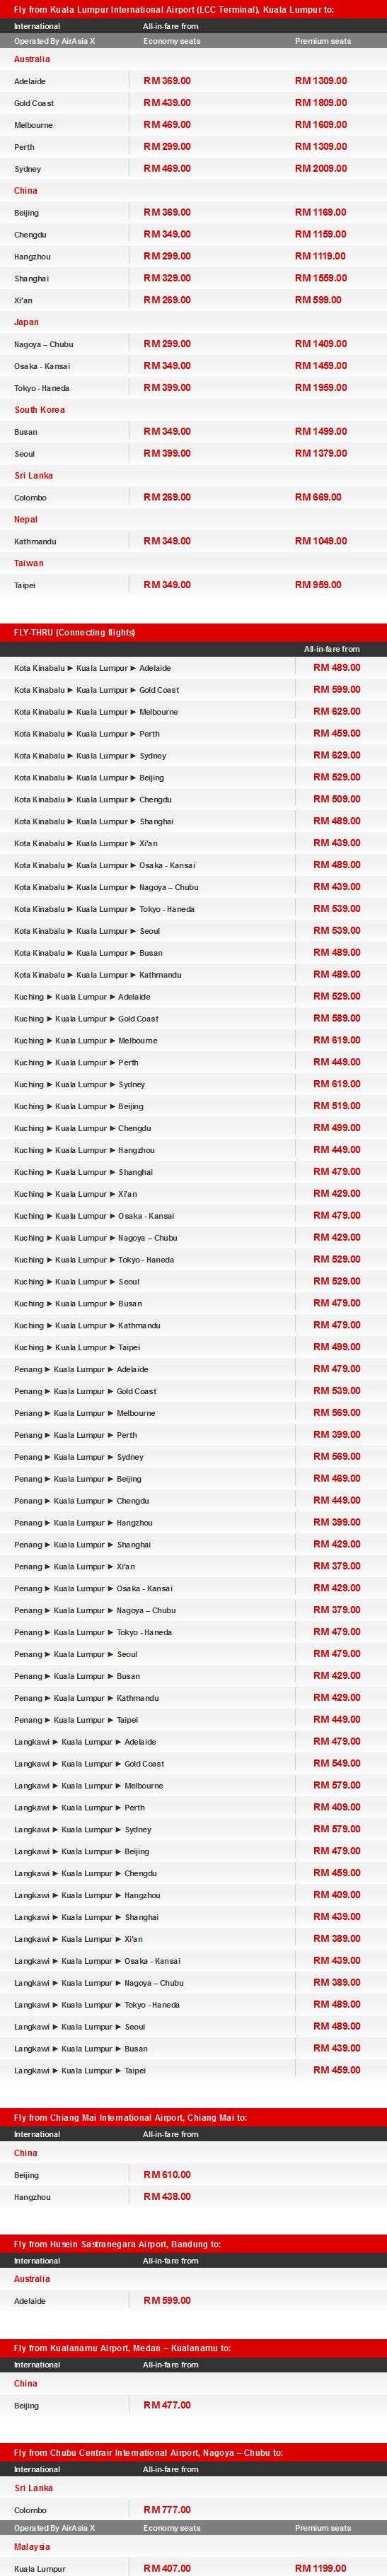 AirAsia X More Low Fare Options Fares Details